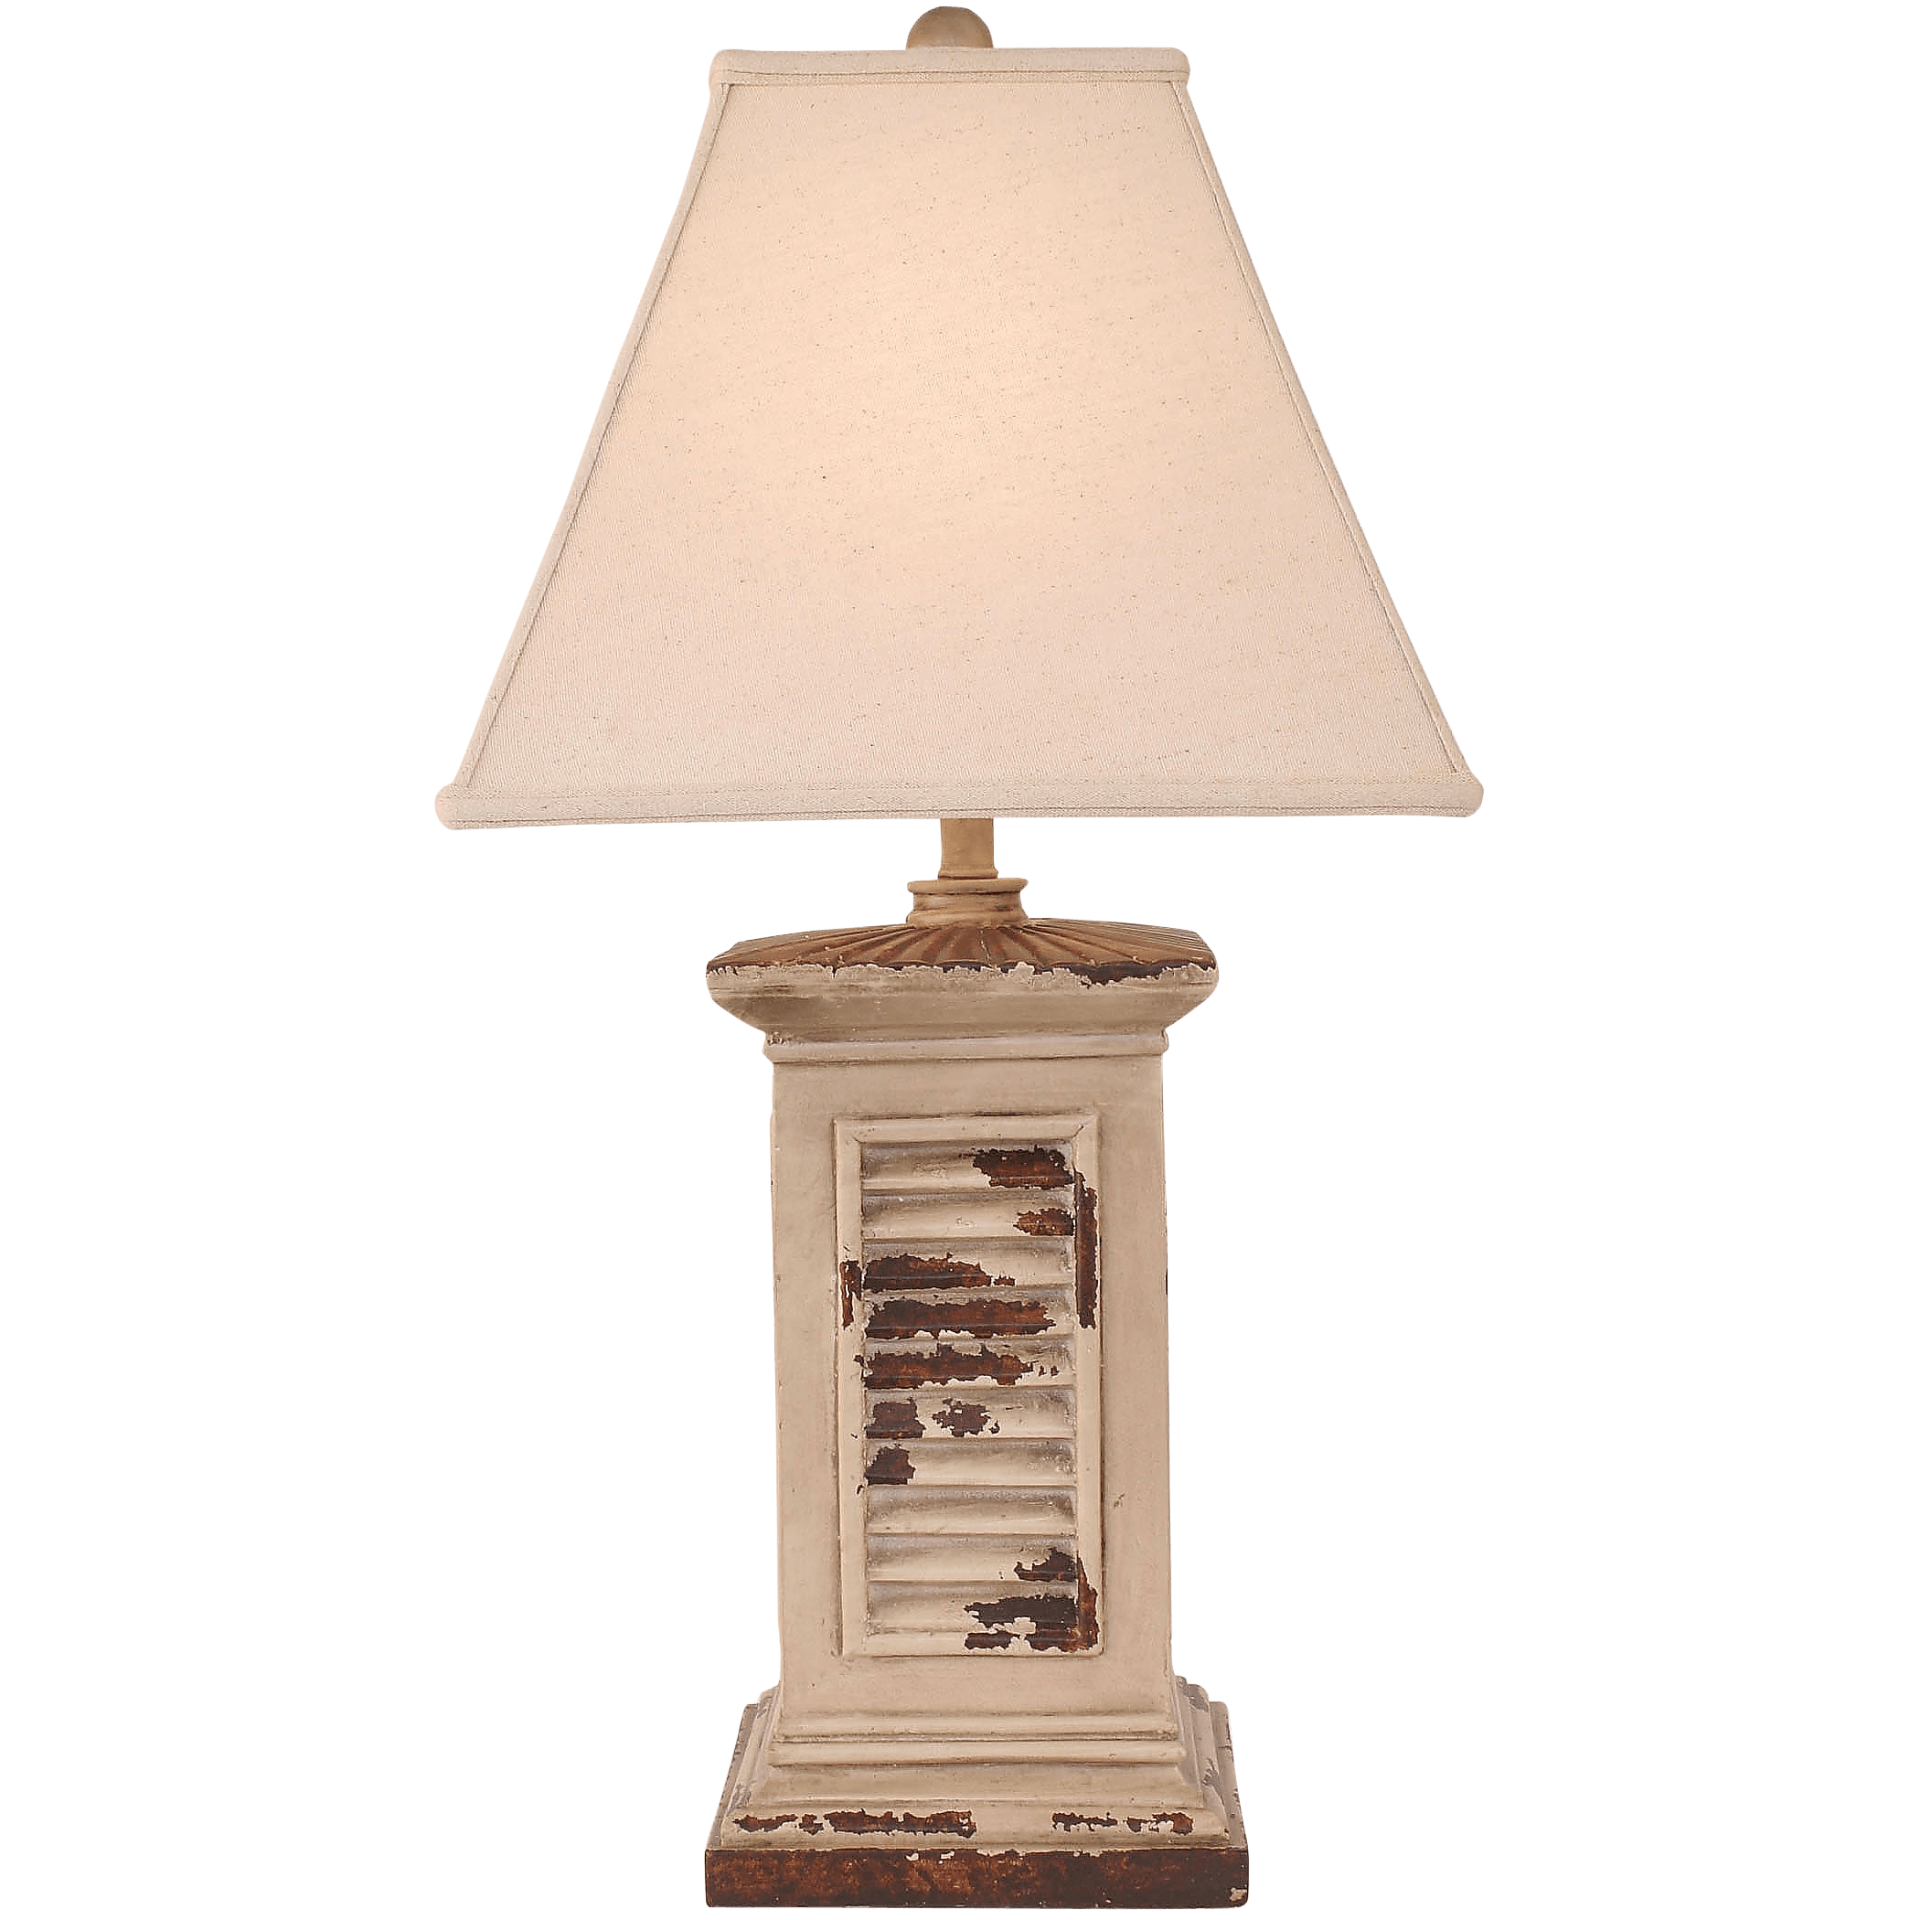 Square Aged Cottage Shutter Table Lamp